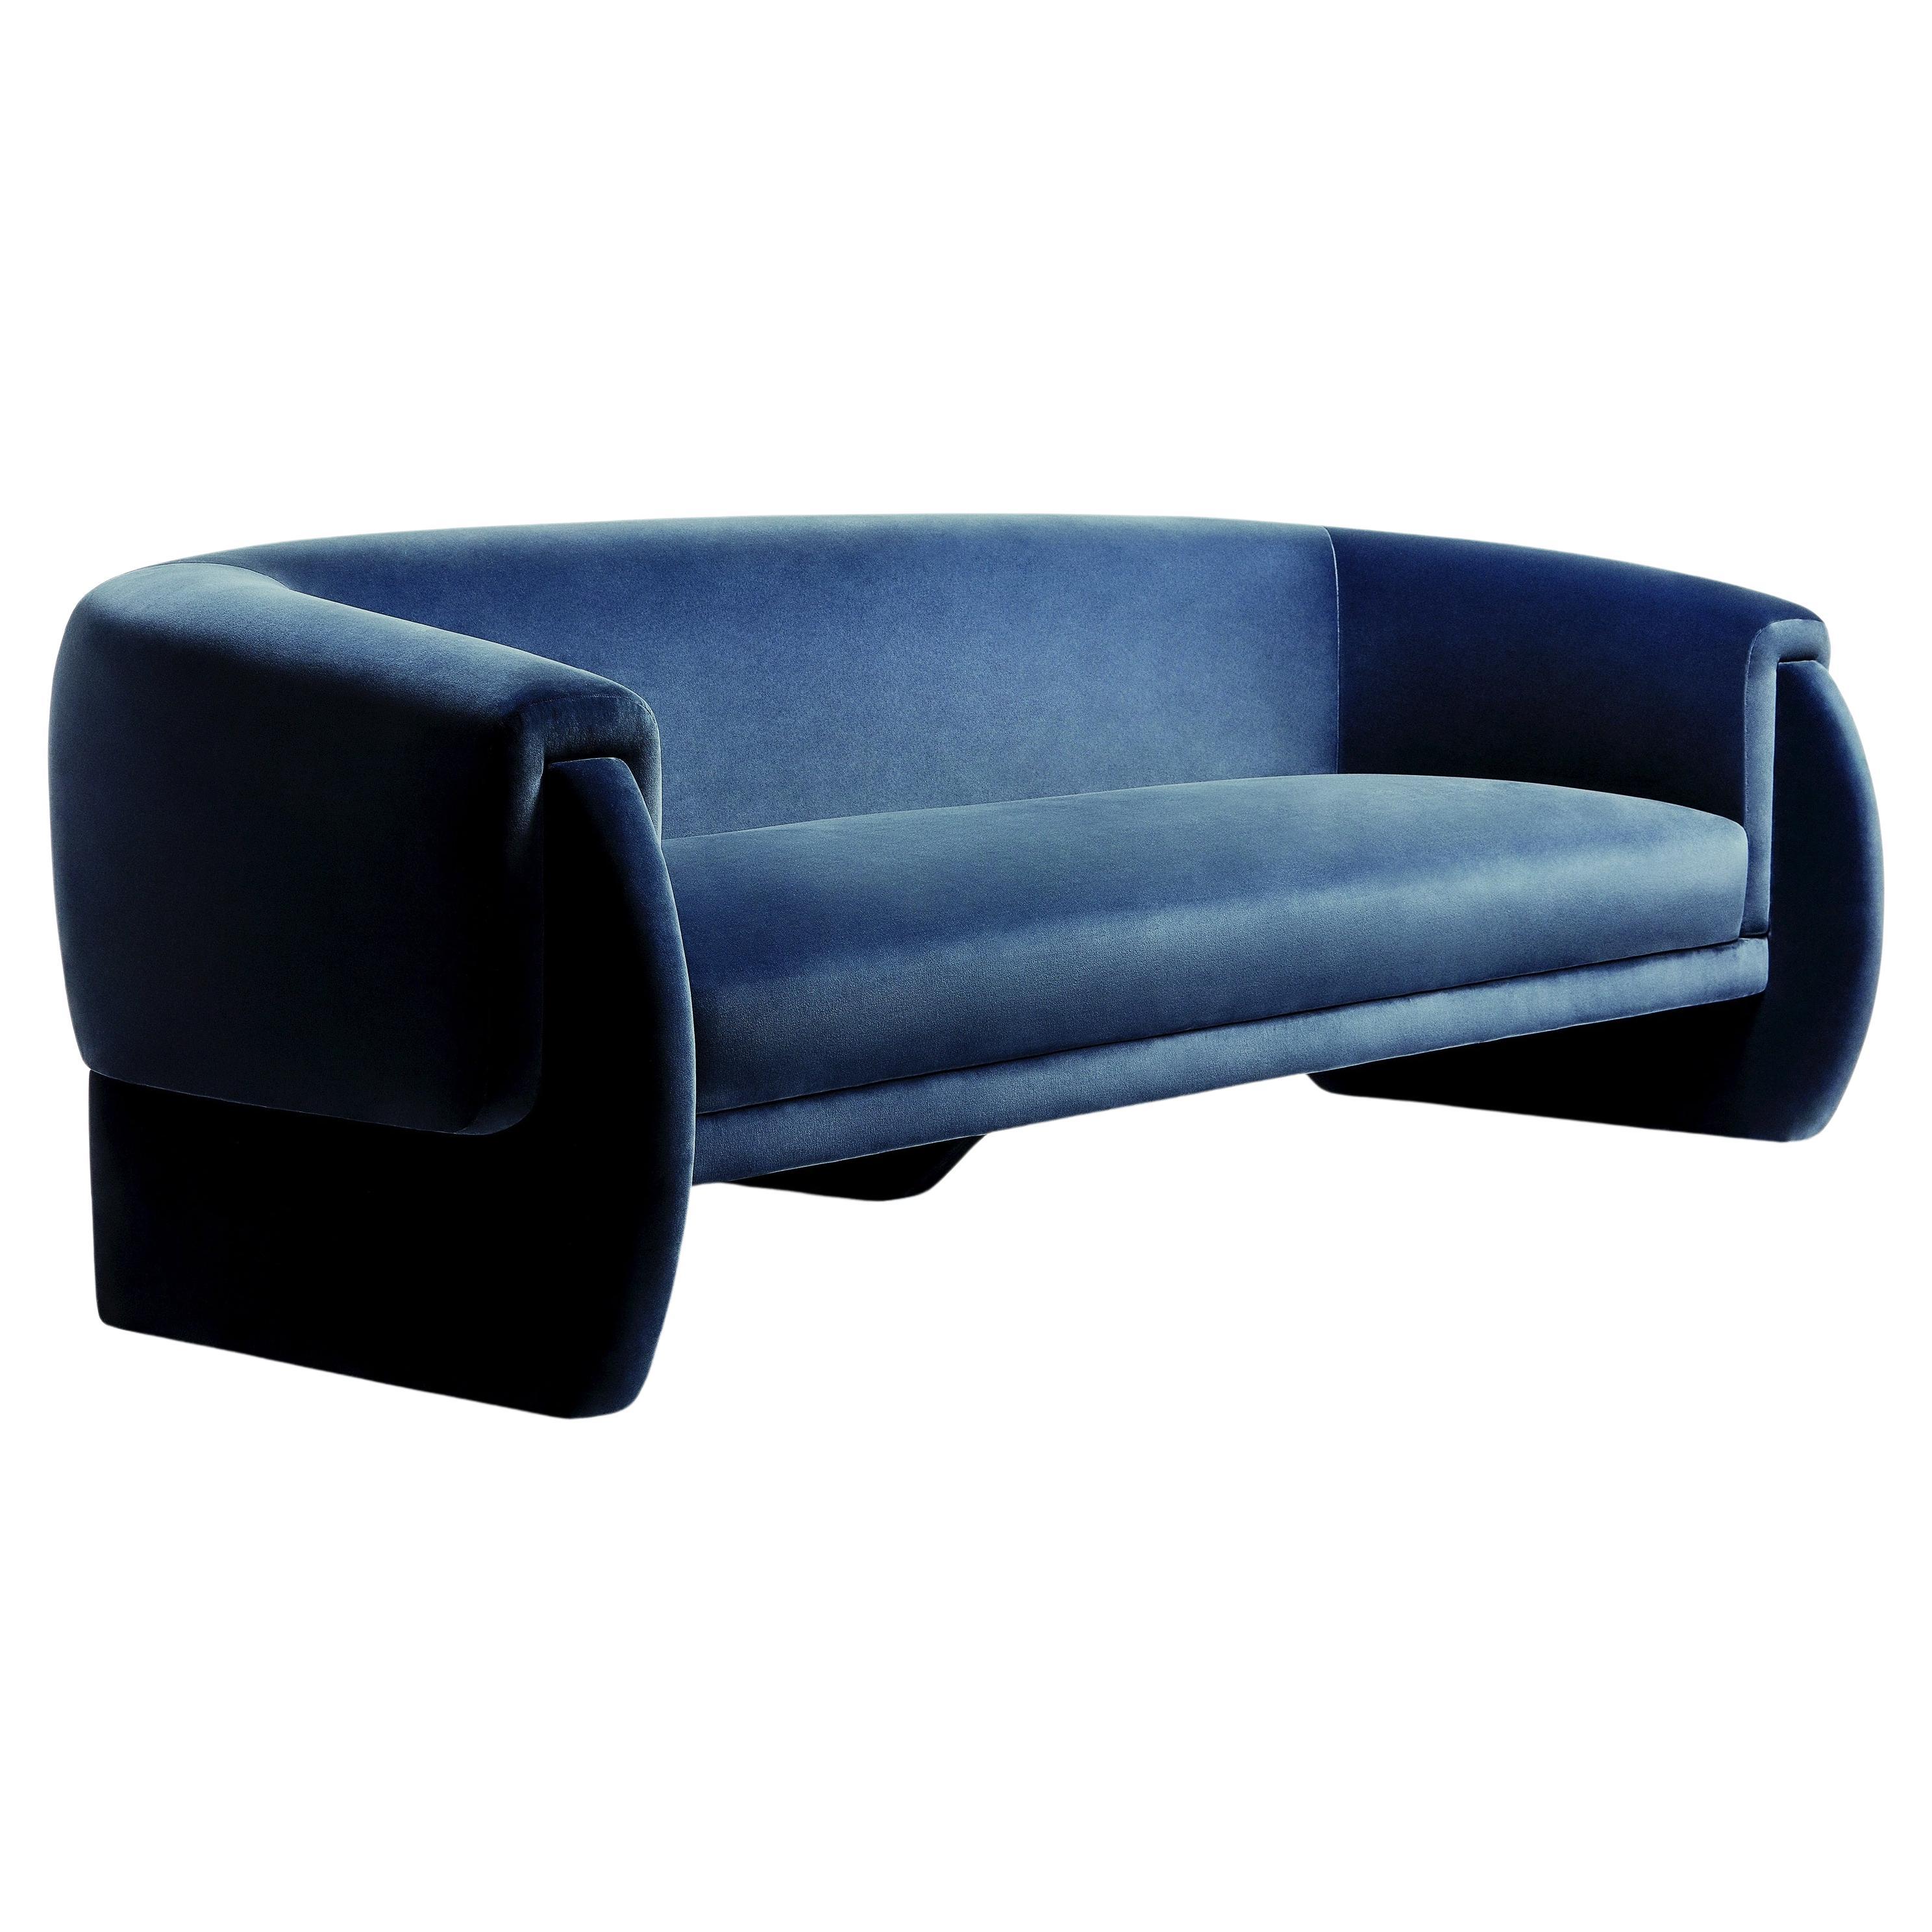 This sofa is a time capsule of style. Taking cues from the most fashionable scarves in history, it’s subtle and layered composition create a dynamic and effortlessly stylish presence. From the half round composition of the arms, to its graceful seat